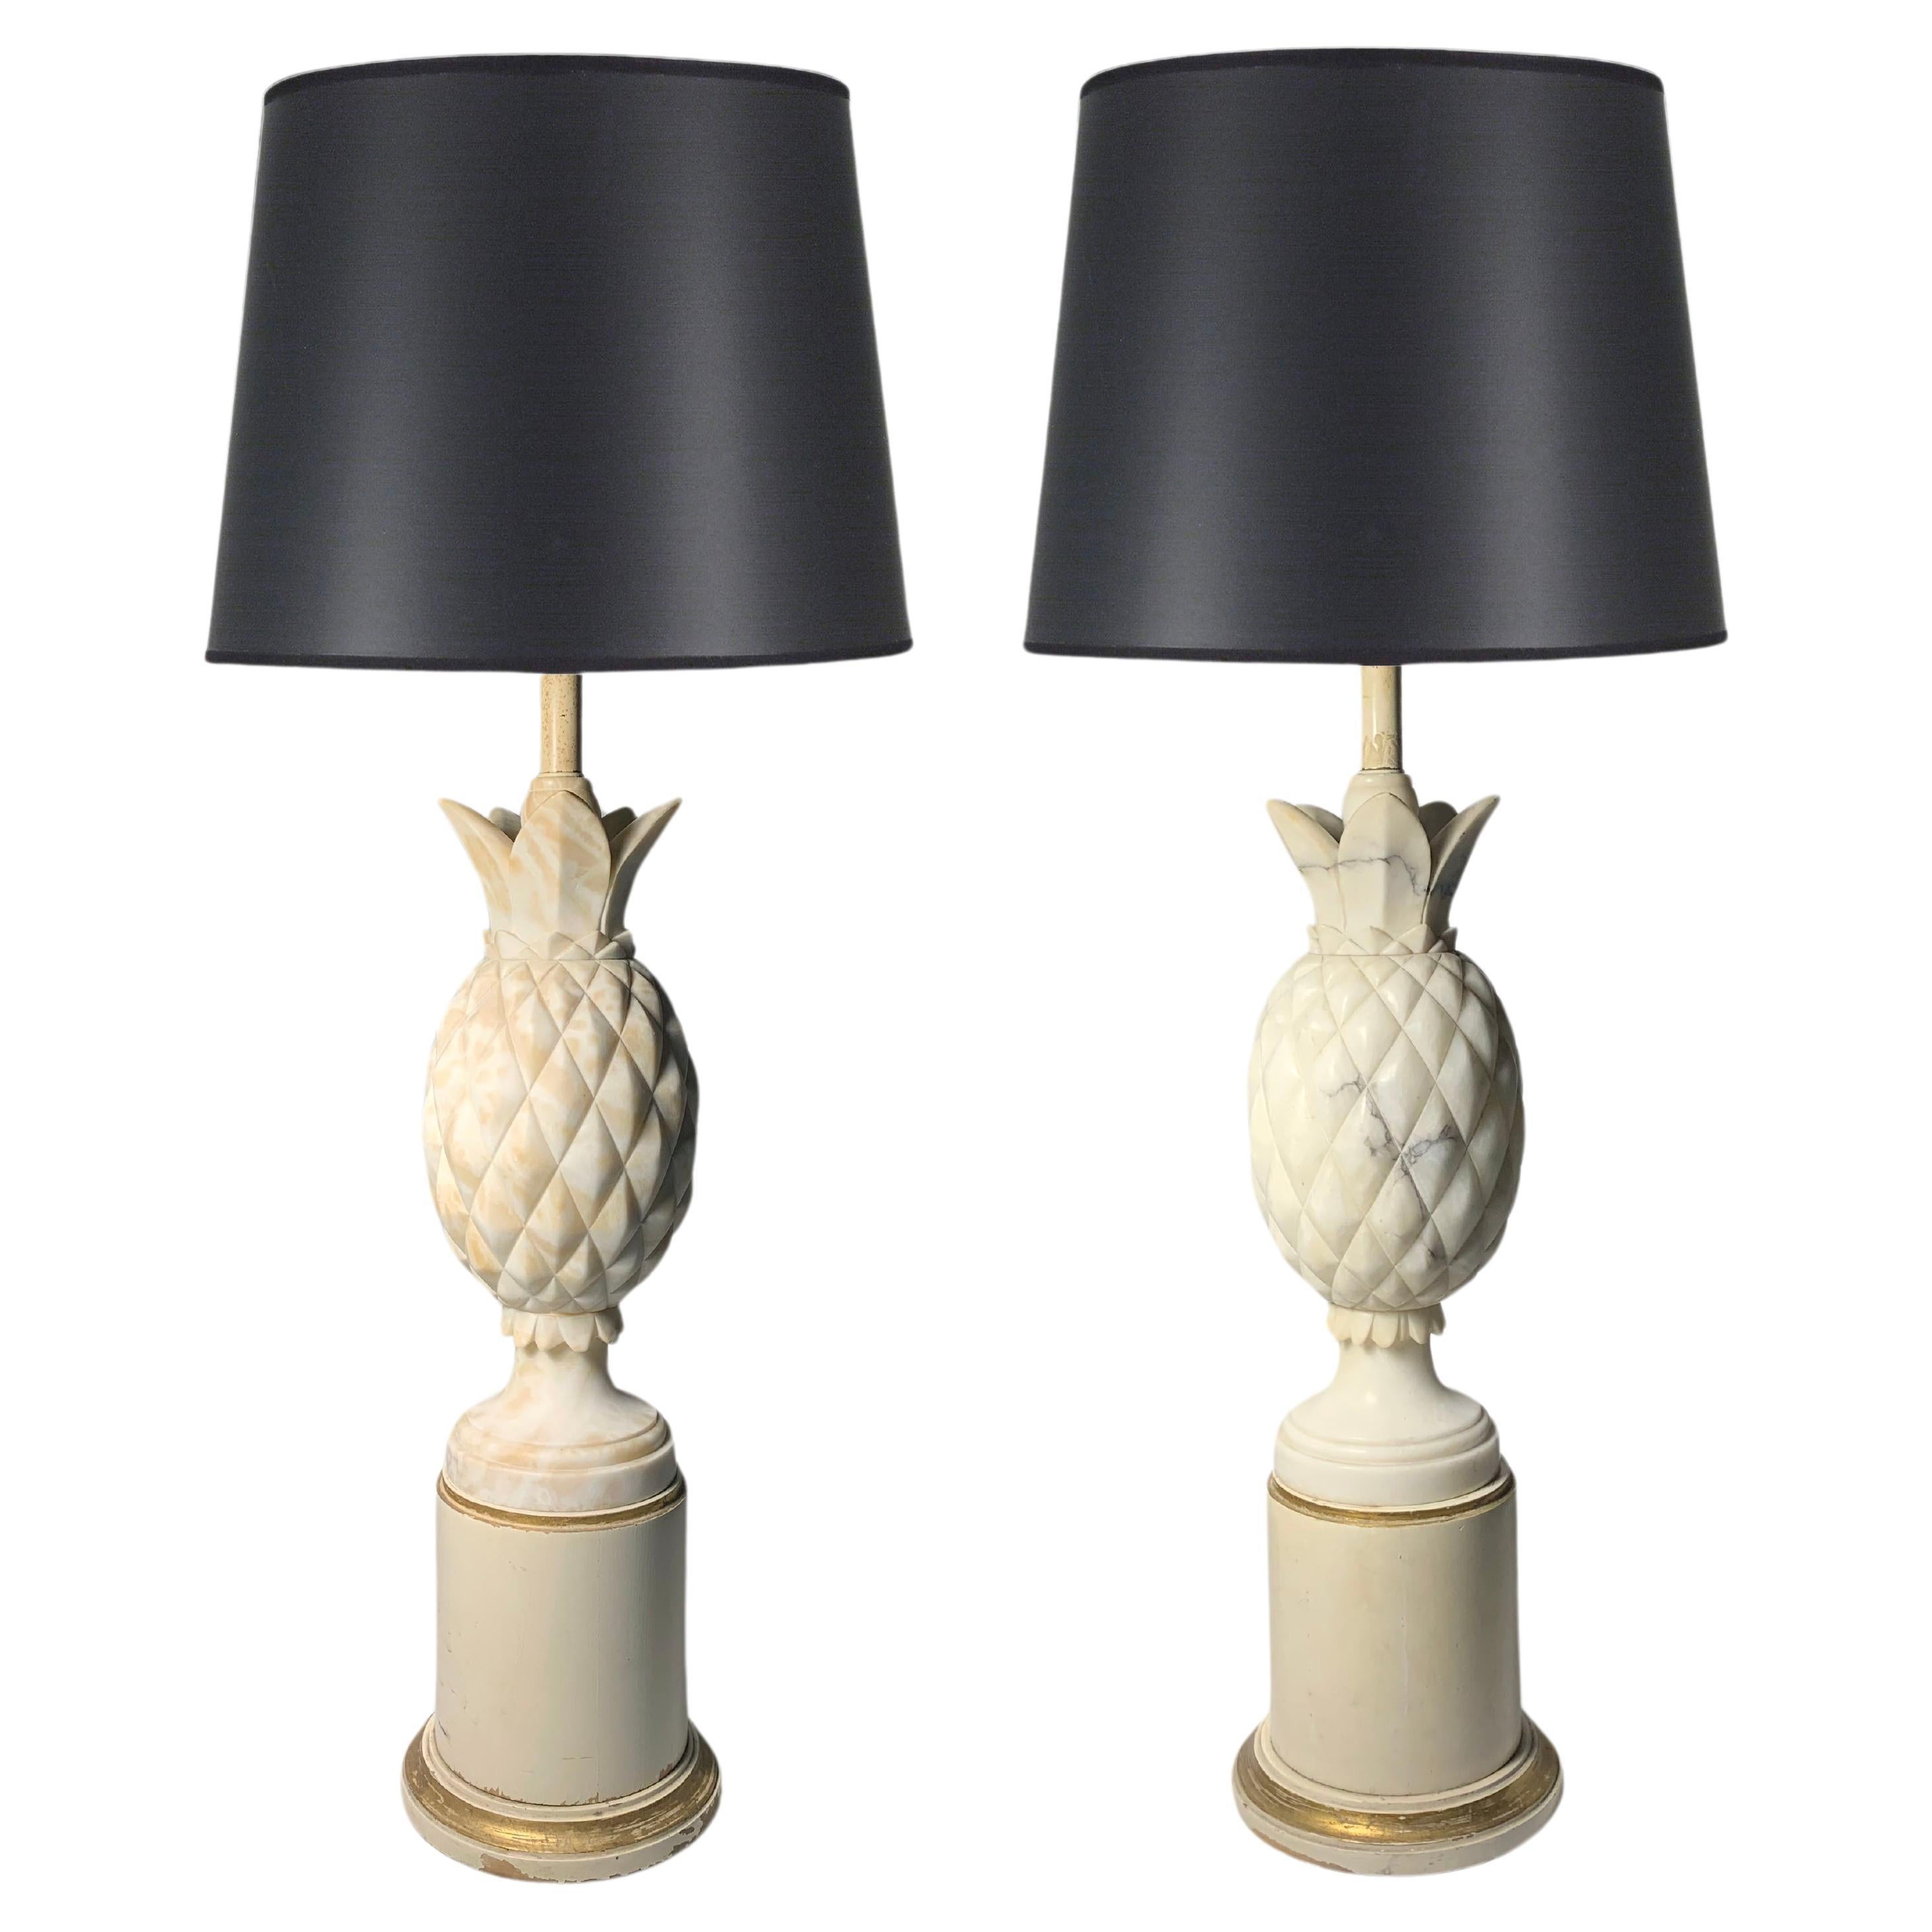 Vintage Pair of Italian Marble / Alabaster Pineapple Lamps For Sale